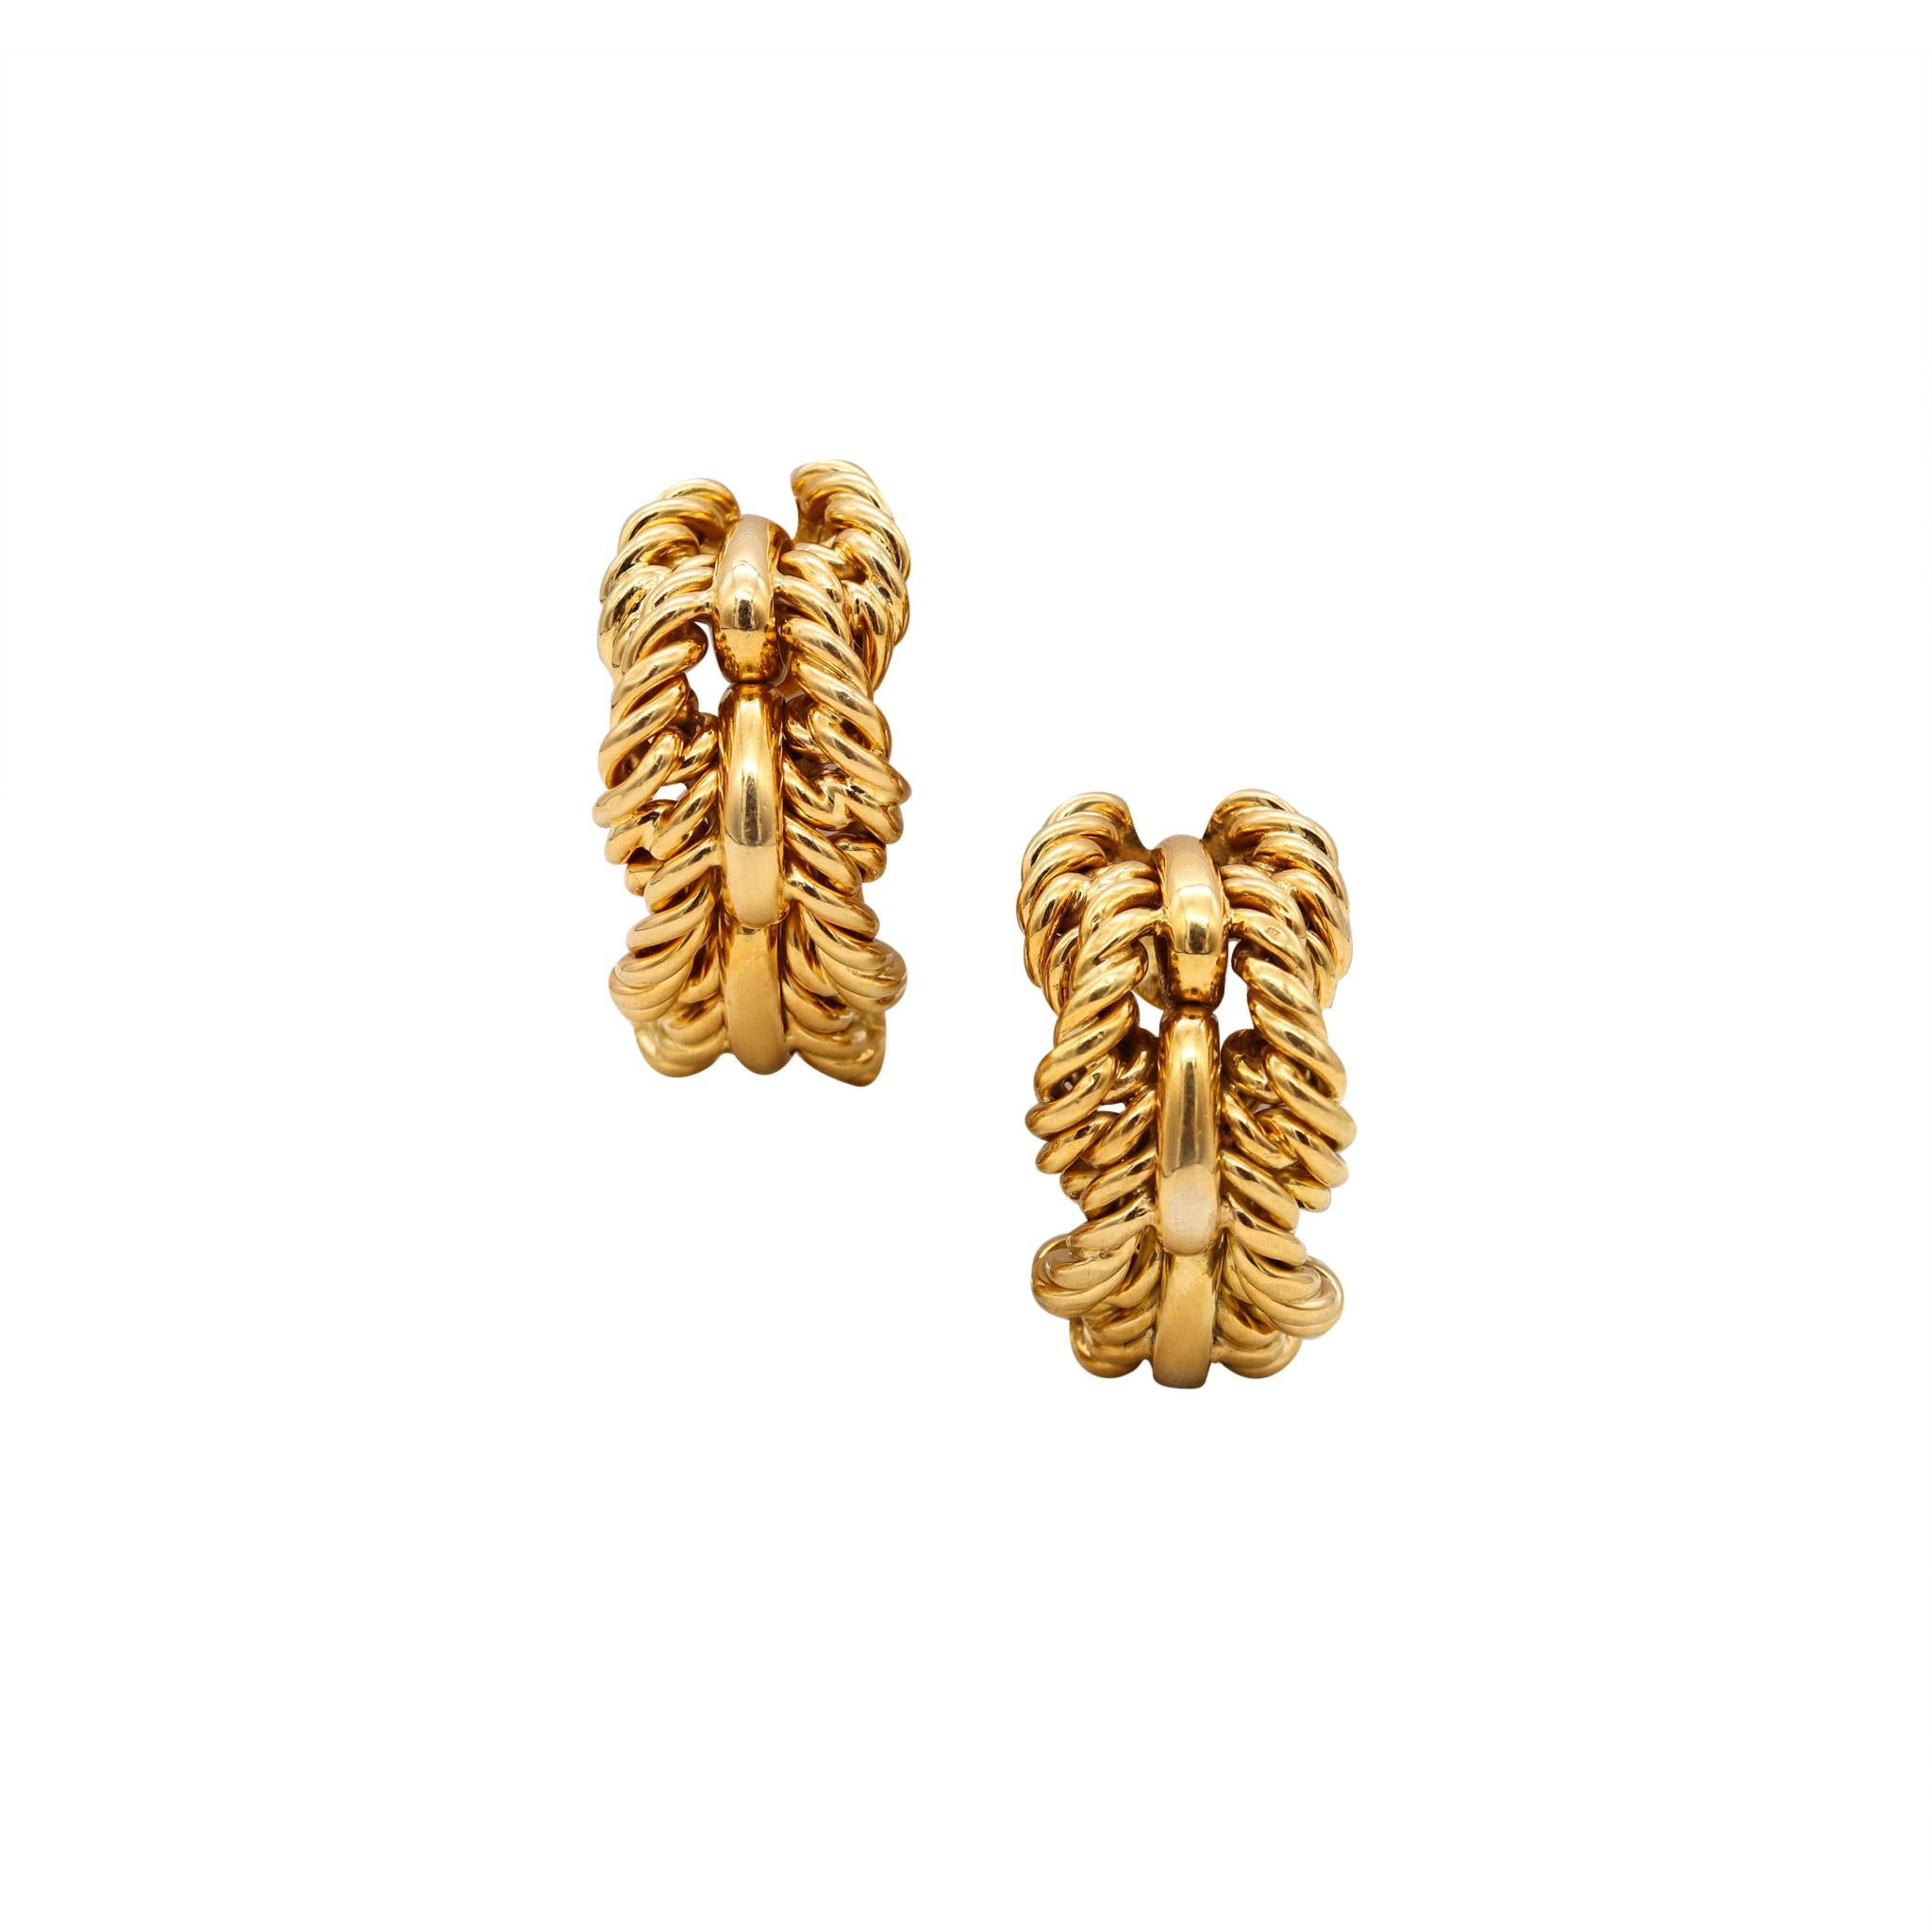 Clips-Earrings designed by Donald Claflin for Tiffany & Co.

Gorgeous and unusual oversized pieces, created by Donald Claflin for Tiffany back in the 1970's. This massive ropes clips earrings was crafted in Paris France, in solid yellow gold of 18